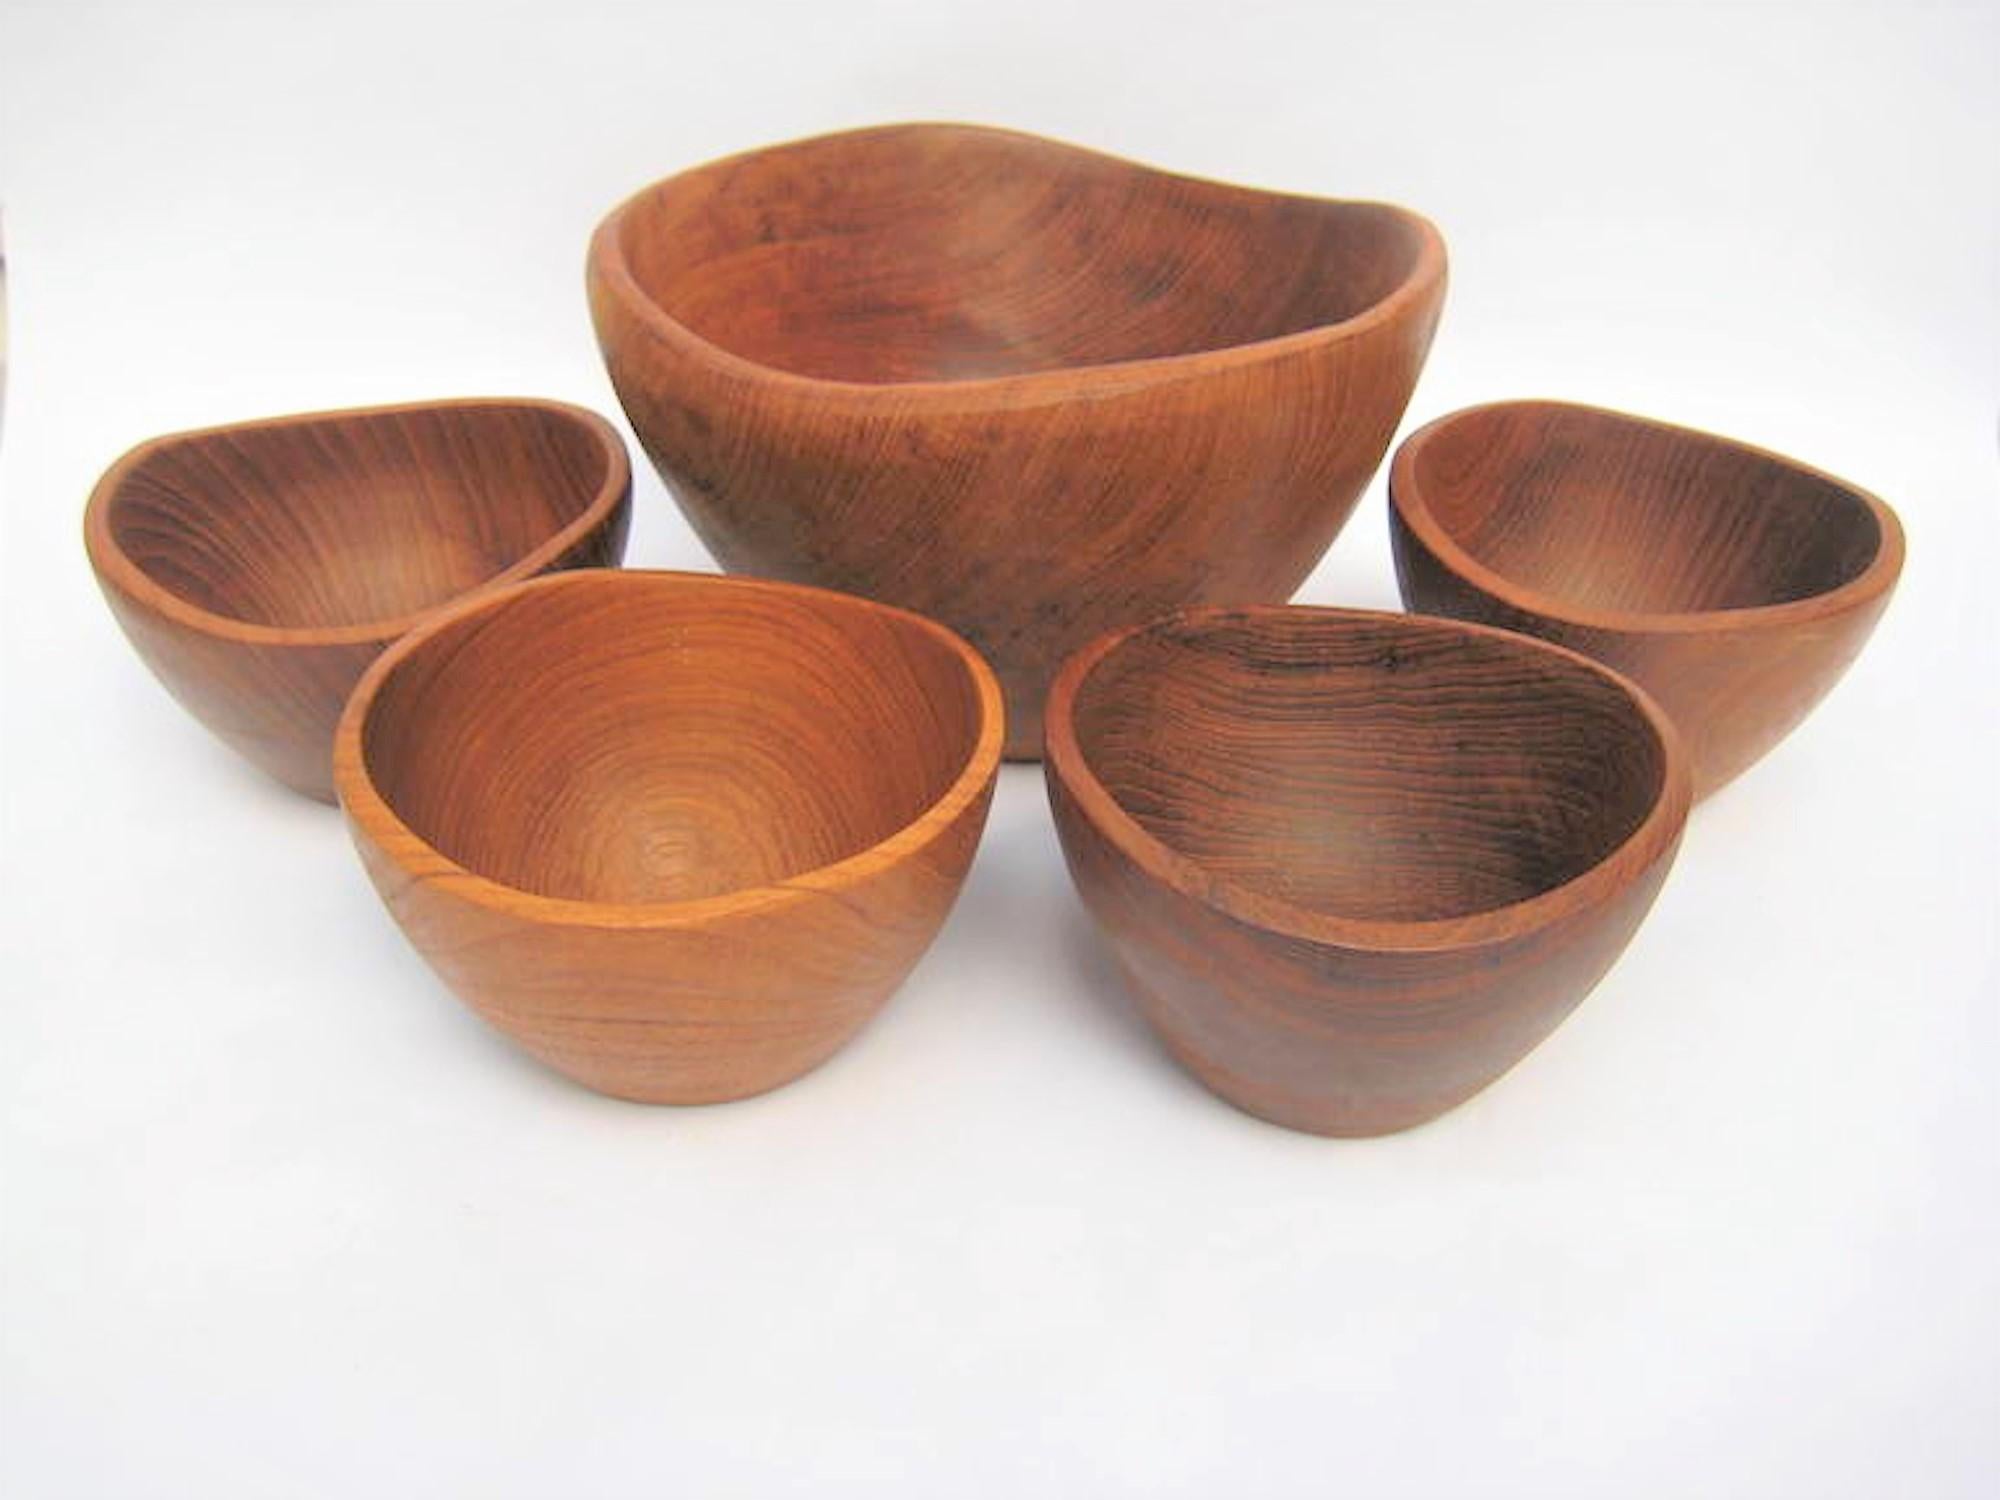 Beautiful midcentury 1960s hand-turned teak 5 piece bowl set. Includes one large bowl and four small bowls. Excellent condition.

Measurements:
Large bowl height 6